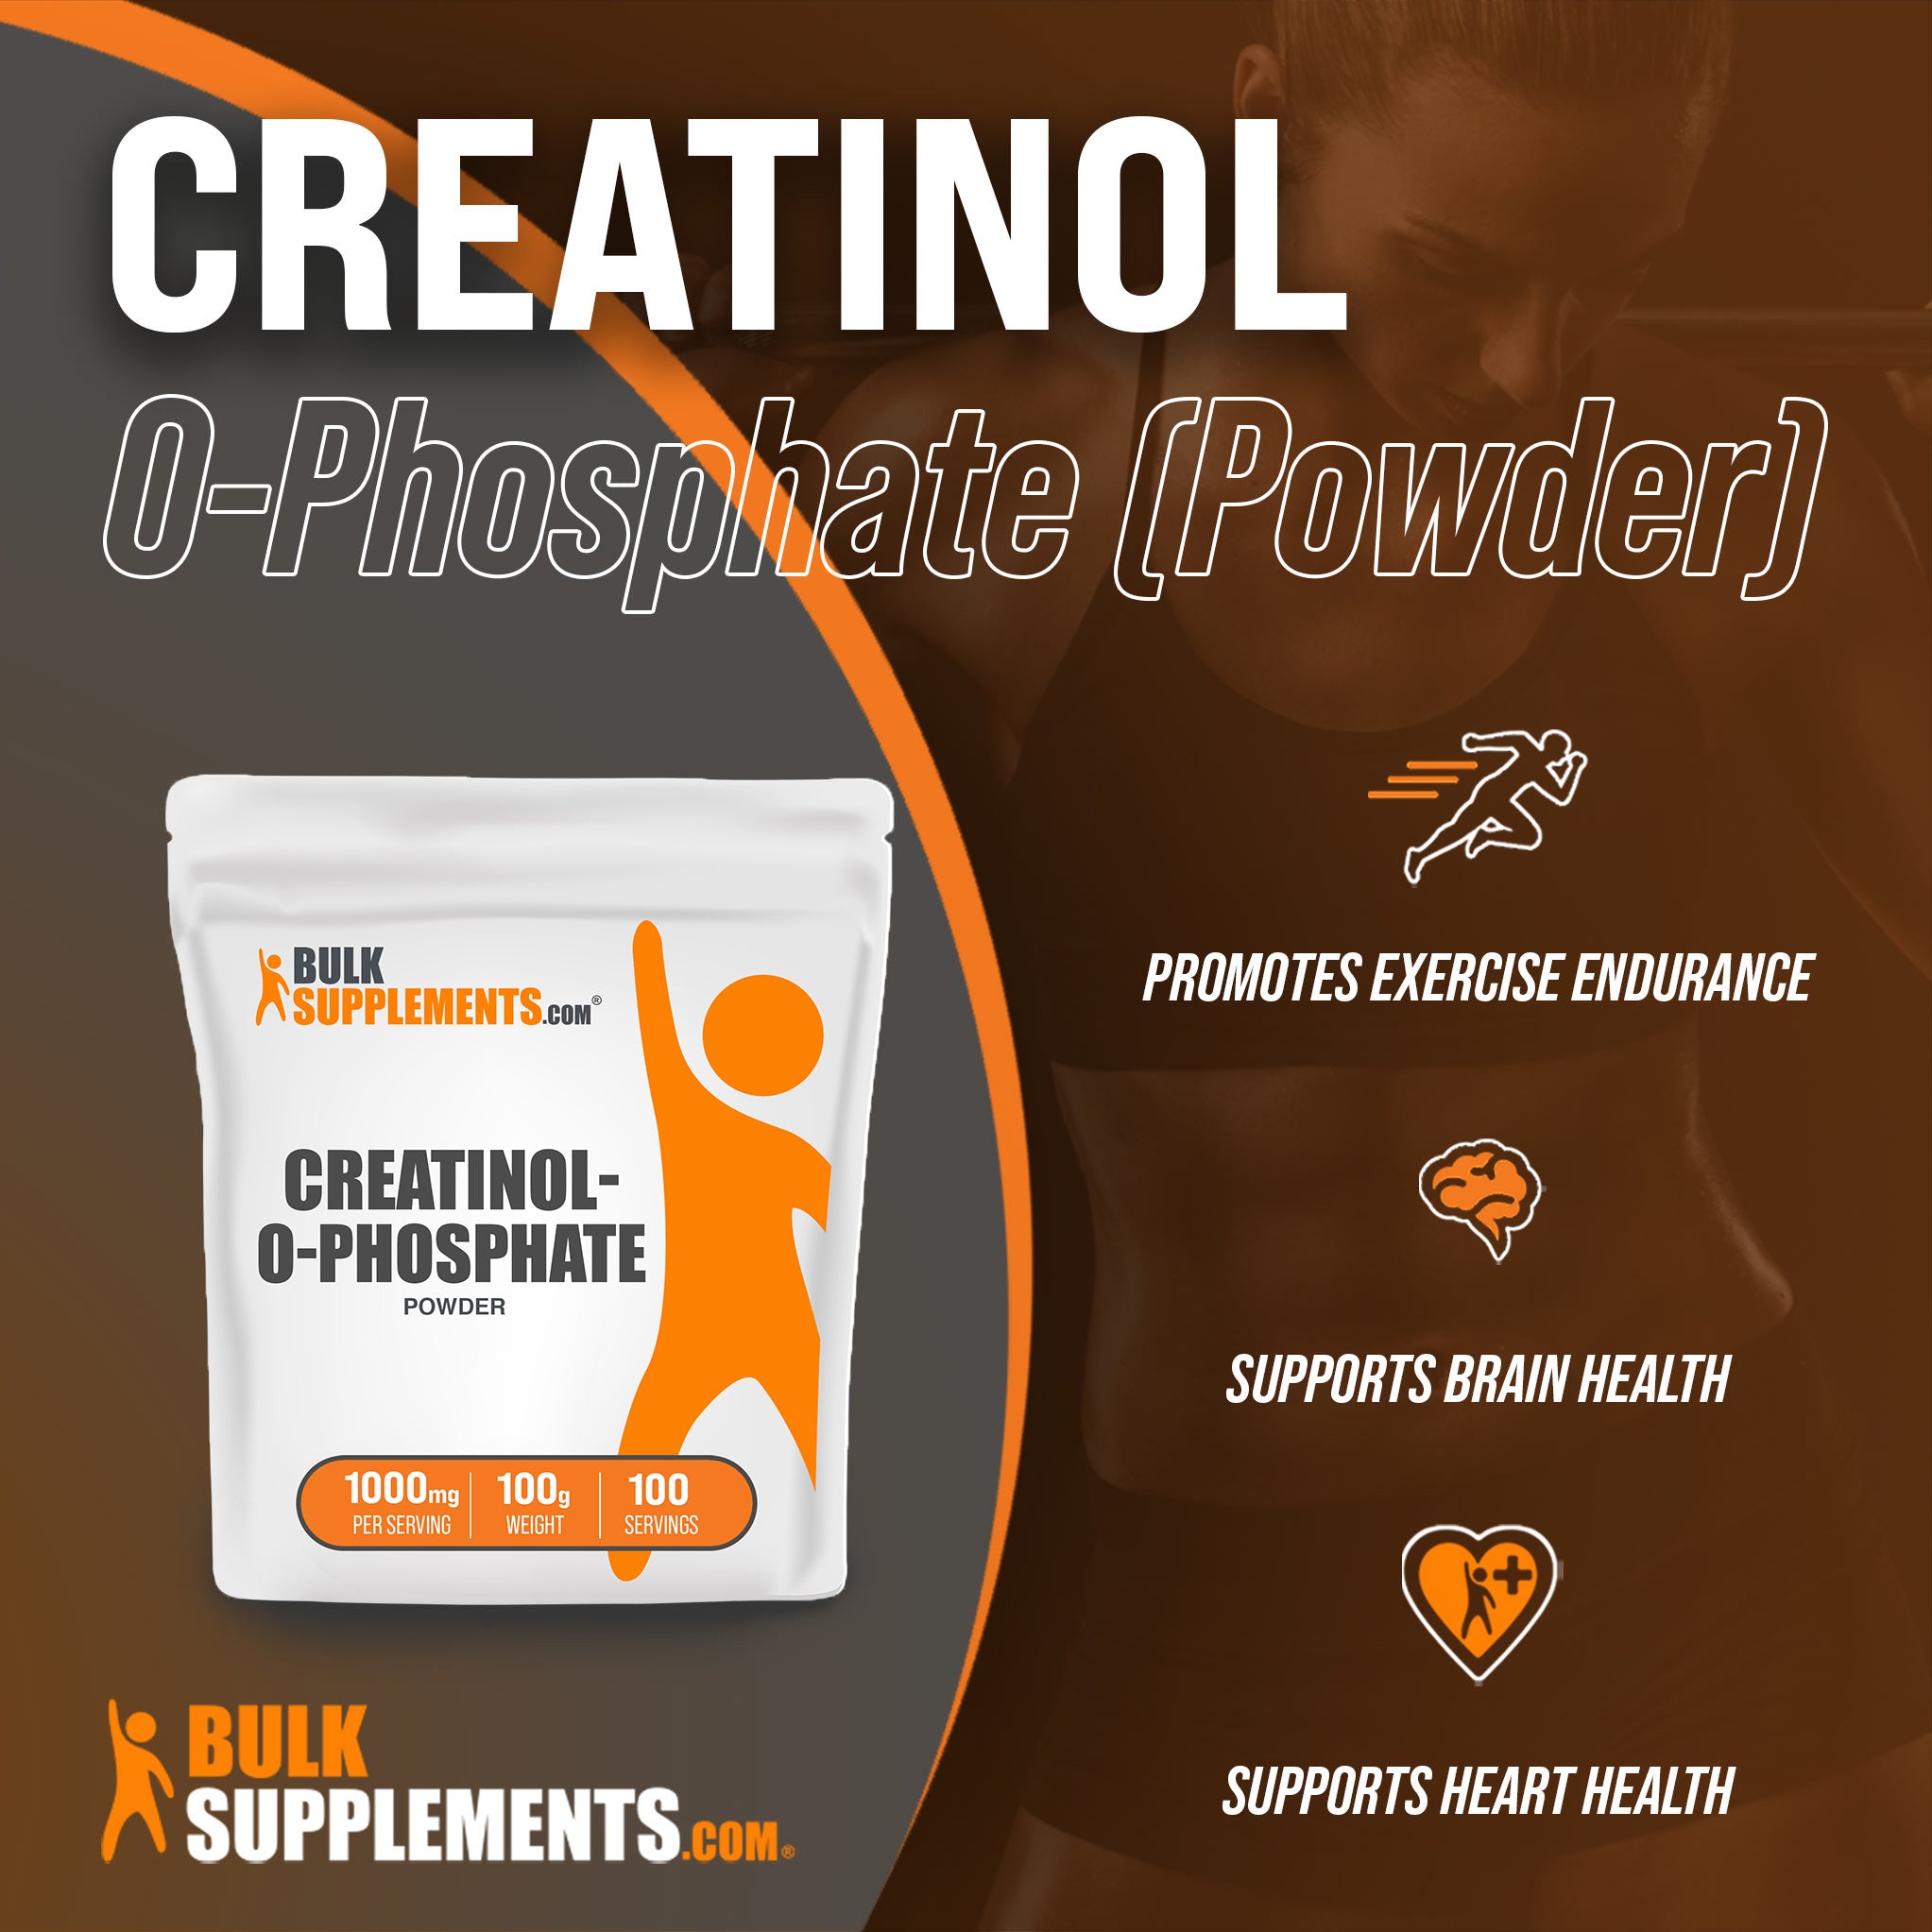 Benefits of Creatinol-O-Phosphate; promotes exercise endurance, supports brain health, supports heart health